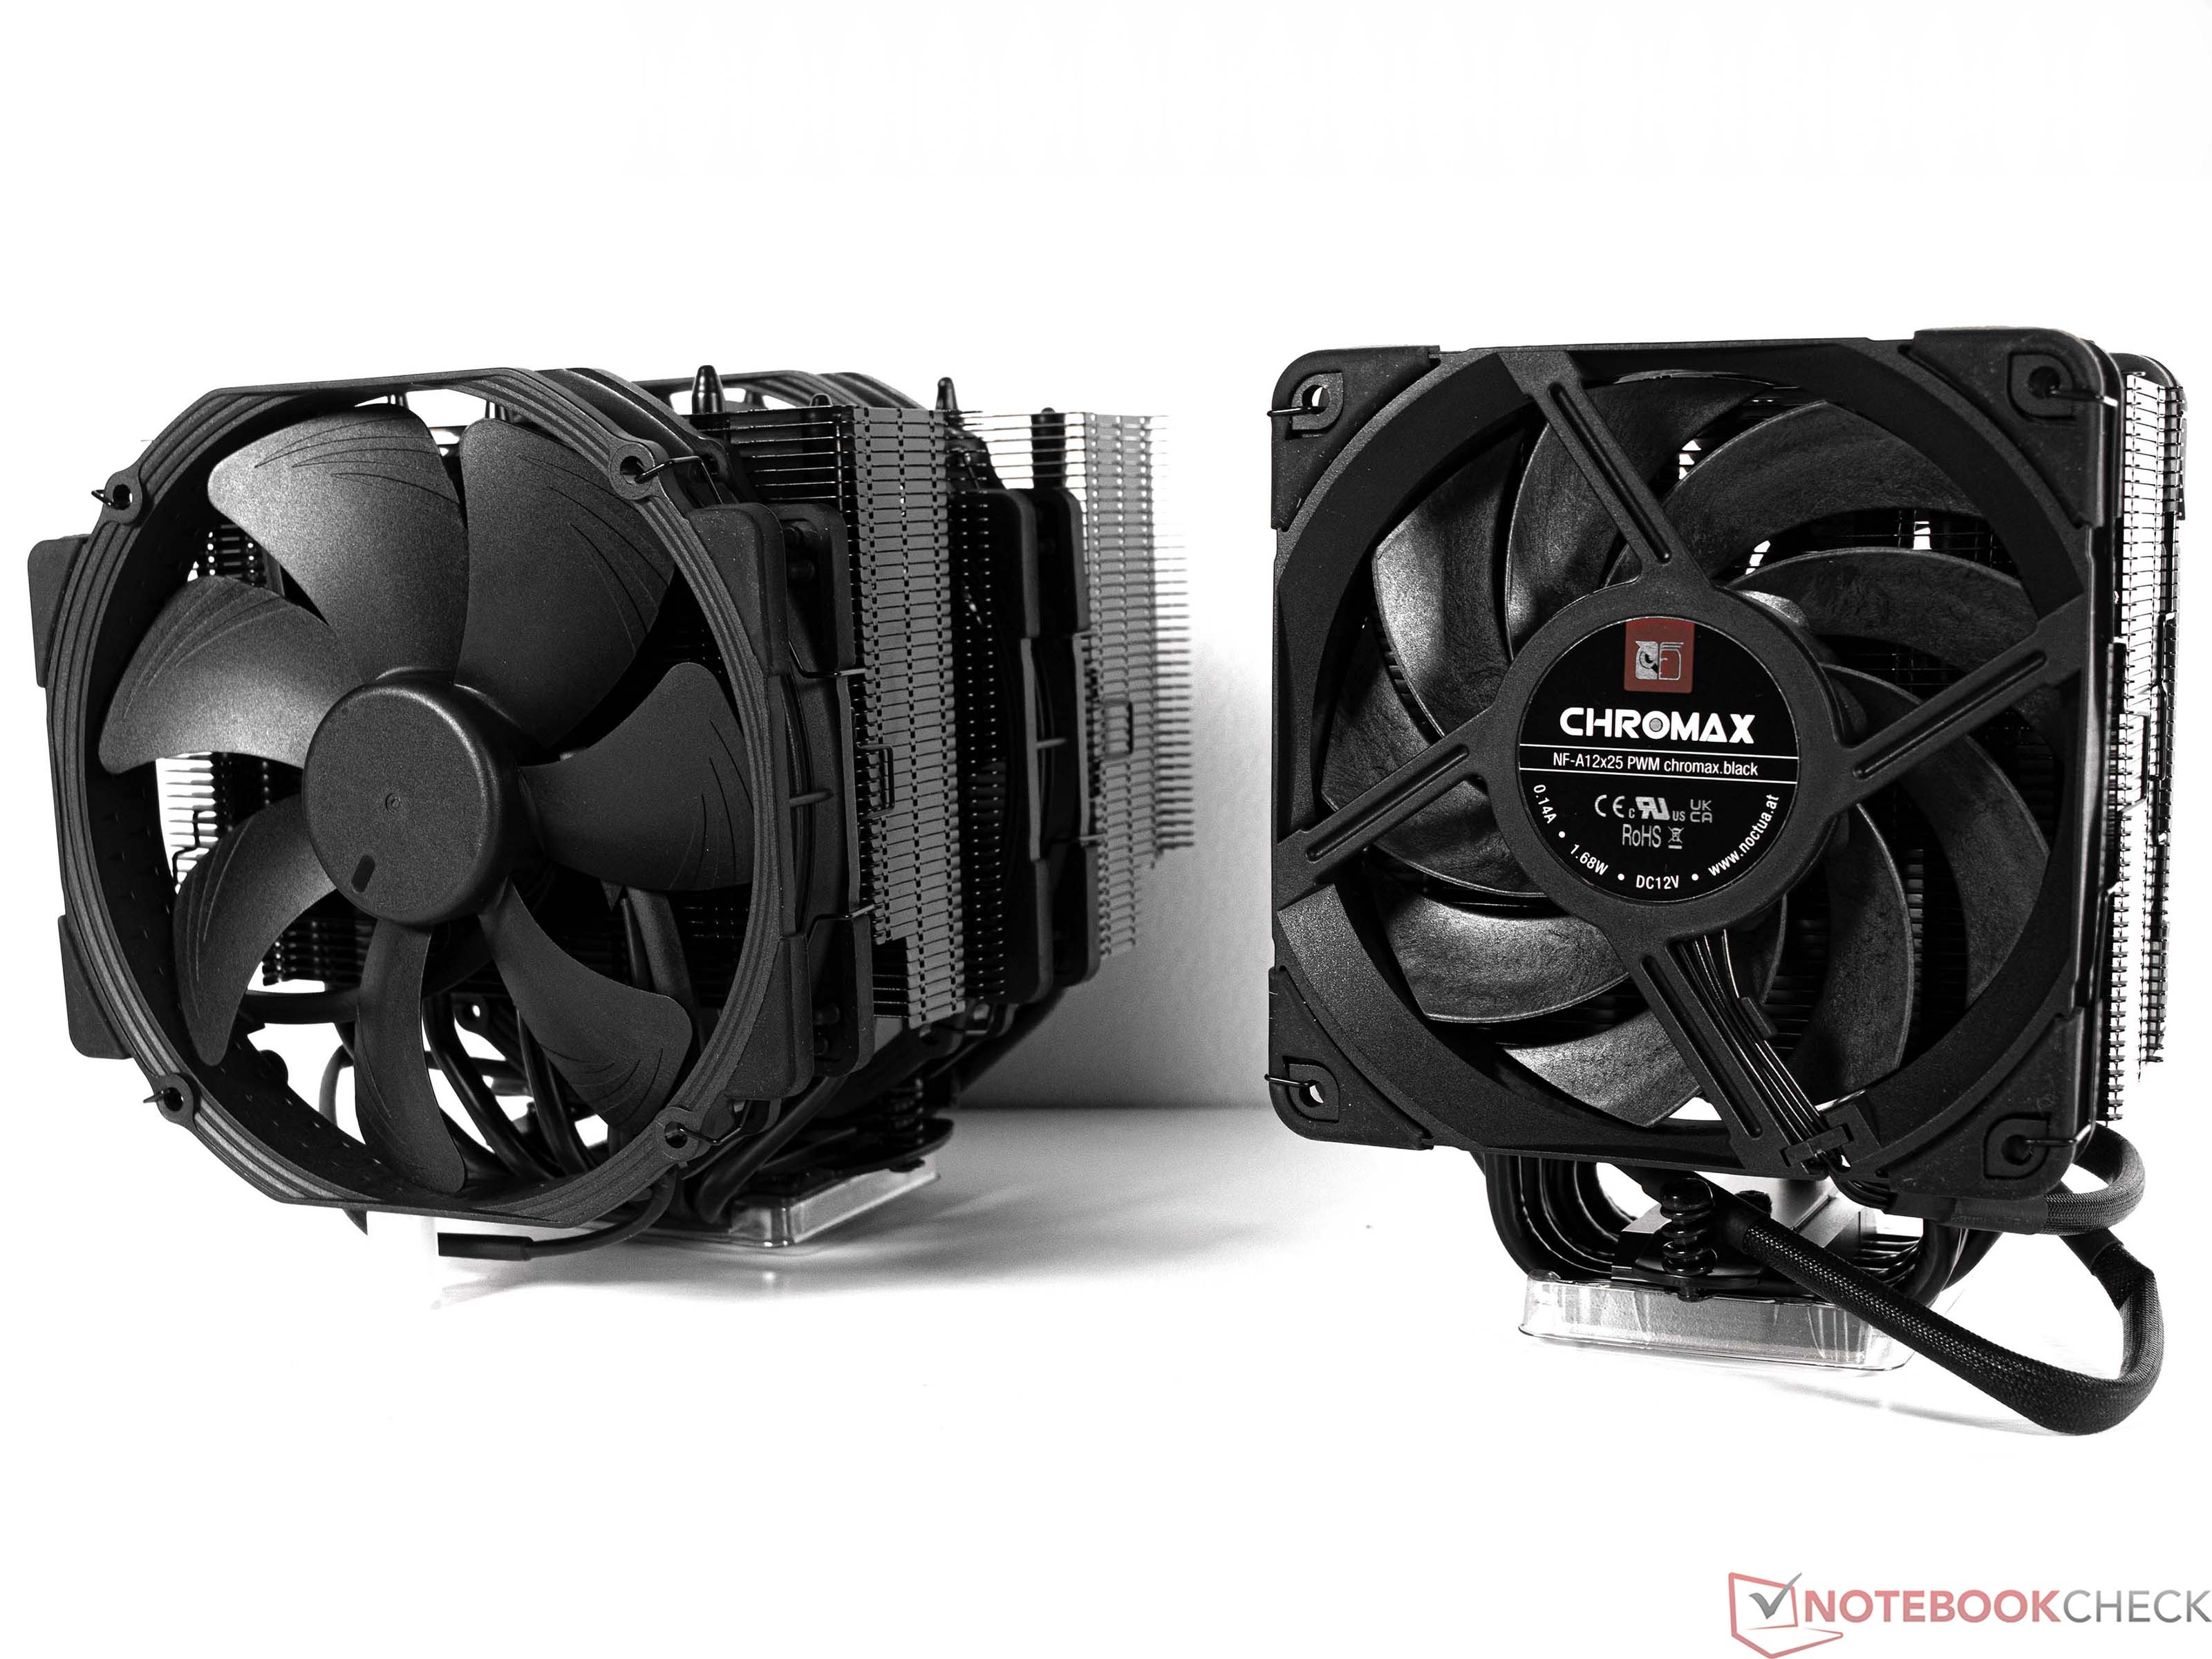 Norm Entrance Rejoice Noctua NH-D15 and NH-U12A Review: Two powerful air coolers for all common  CPU sockets - NotebookCheck.net Reviews